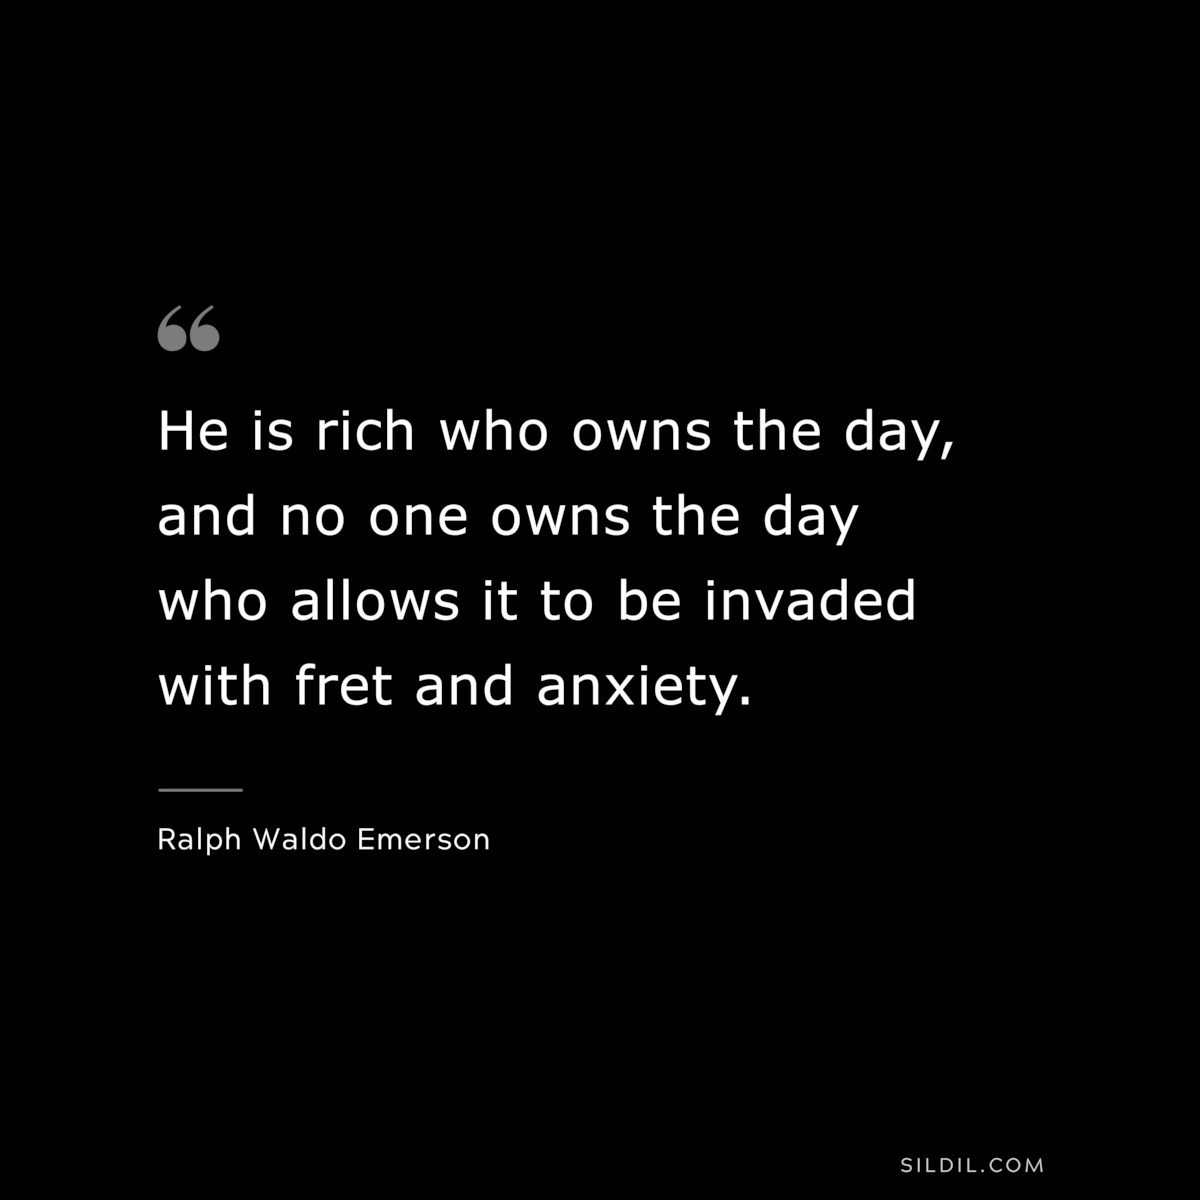 He is rich who owns the day, and no one owns the day who allows it to be invaded with fret and anxiety. — Ralph Waldo Emerson